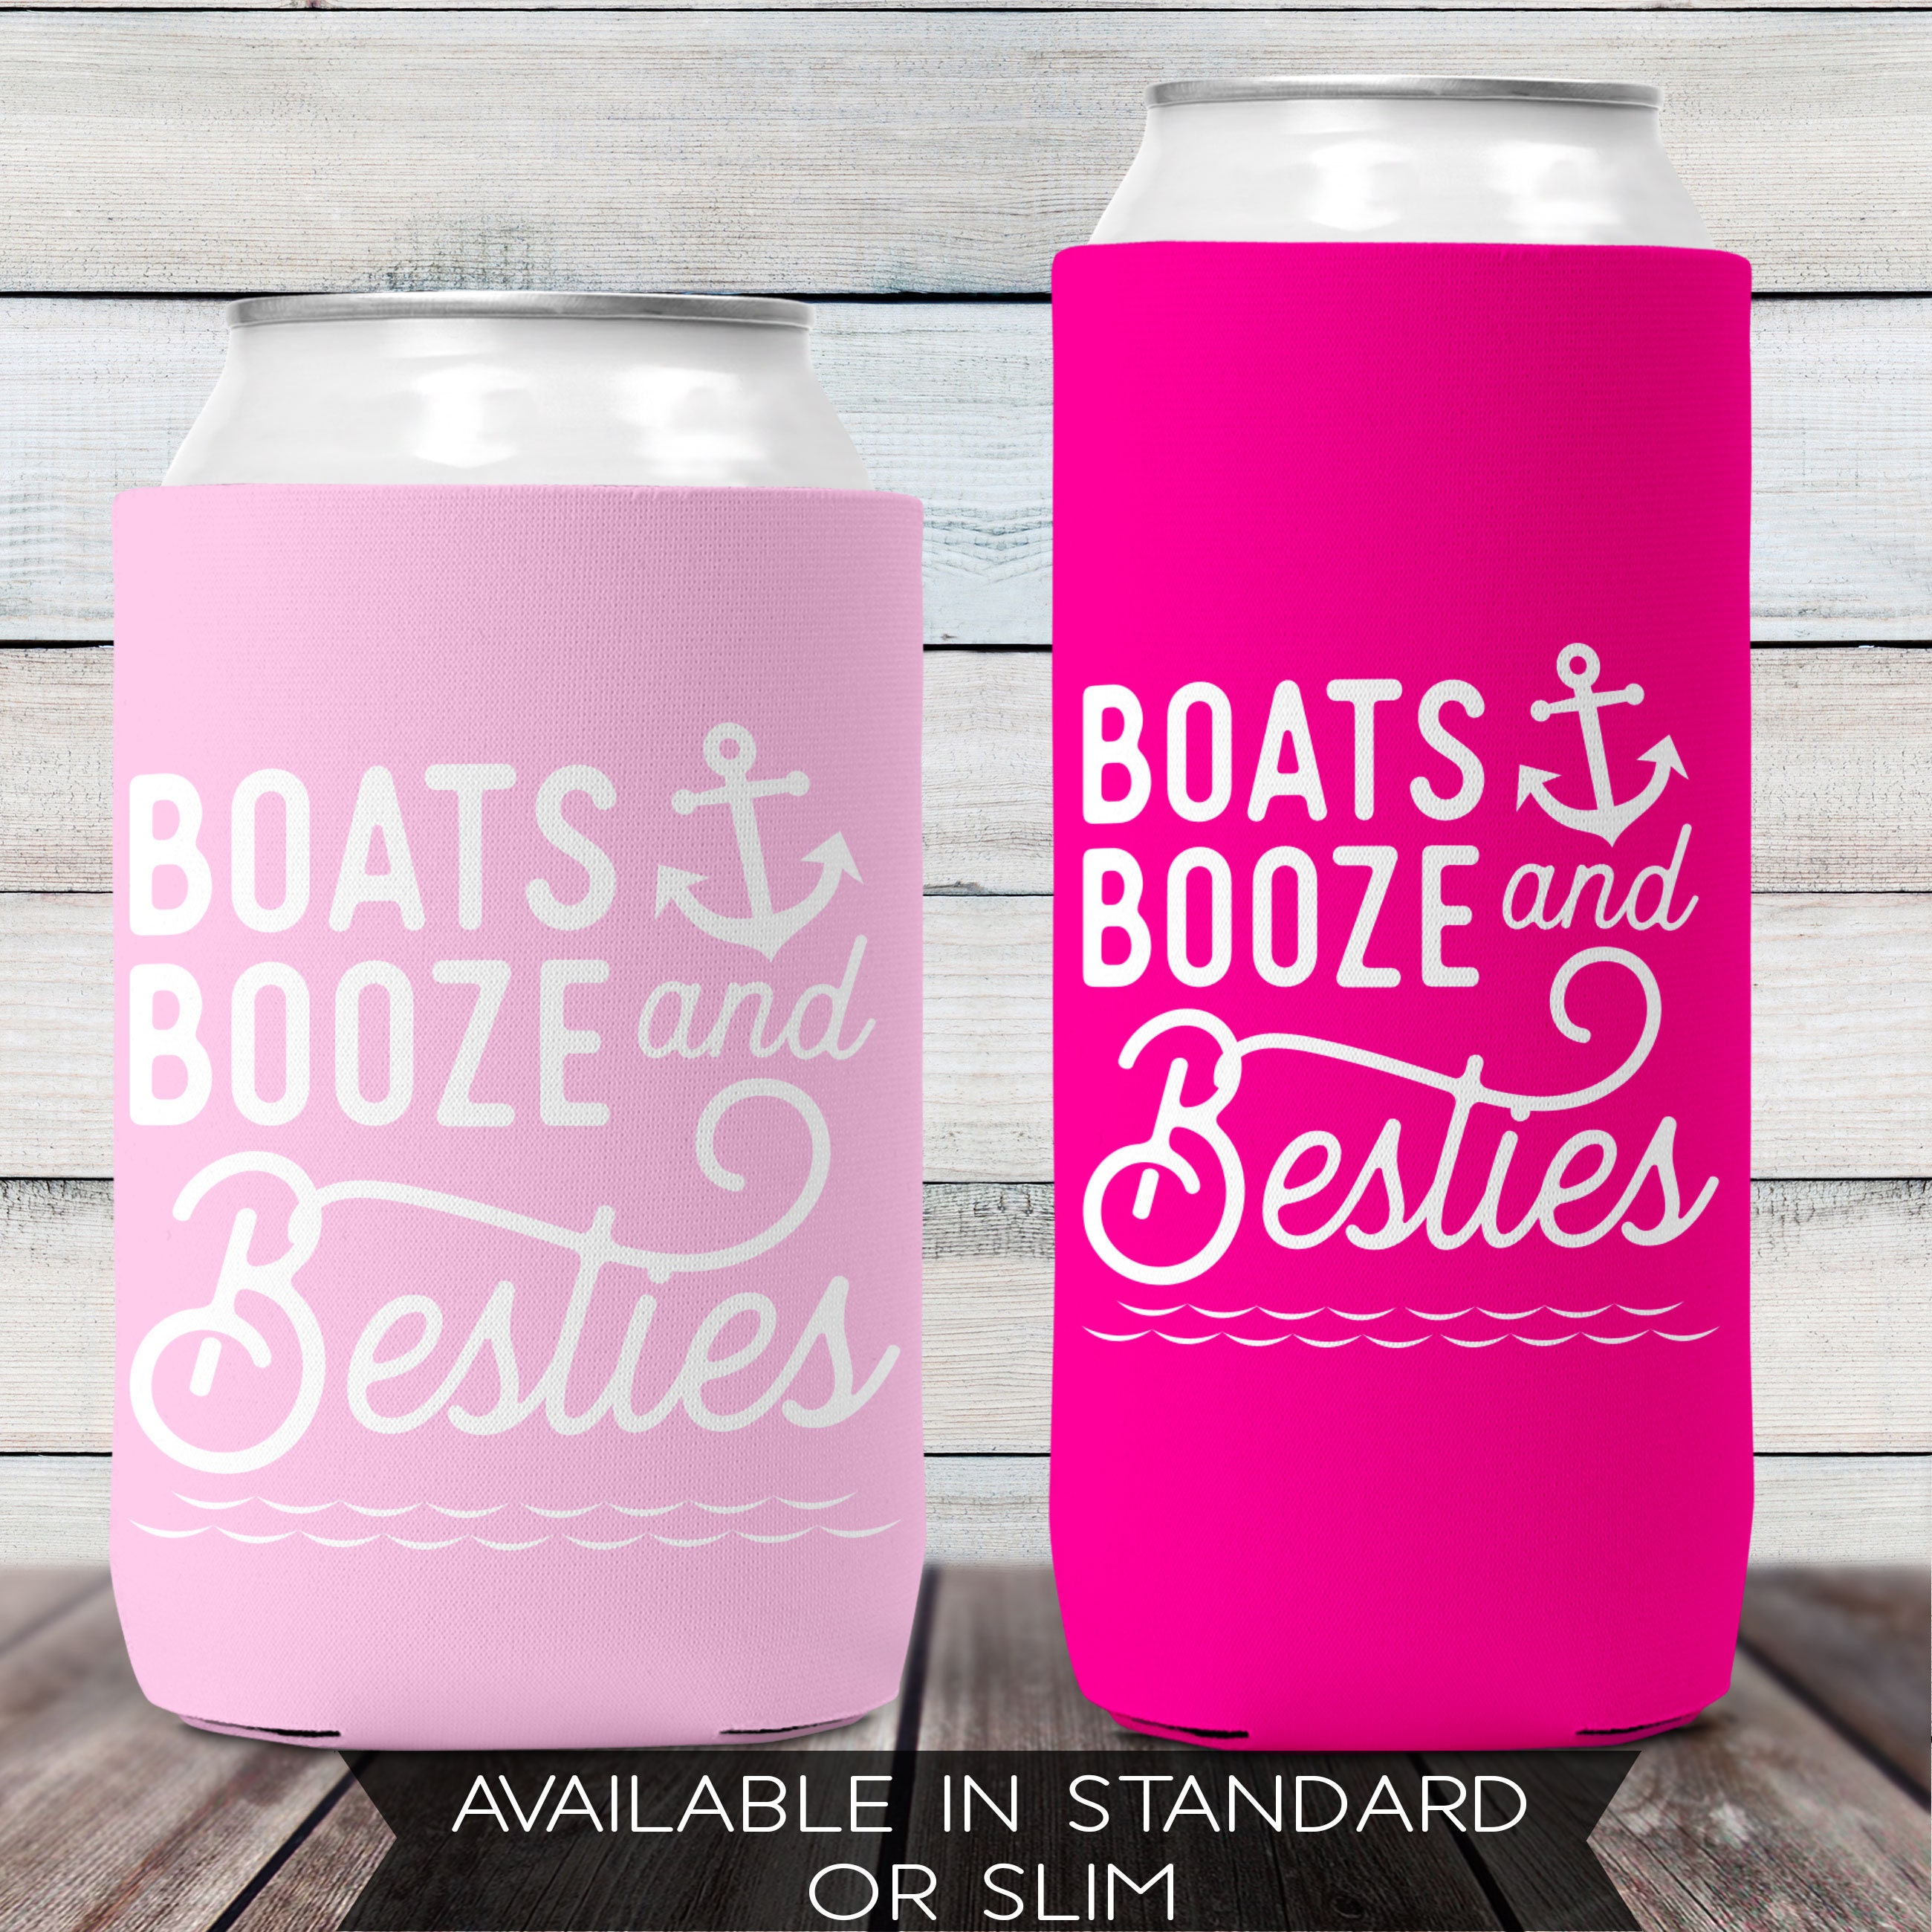 Slim Can Cooler, Ride the Captain, Boat, White Claw Coozie, Boat Koozie,  Skinny Can, Boat Tumbler, Boat Gifts, Gifts for Her, Boat Coozie, 